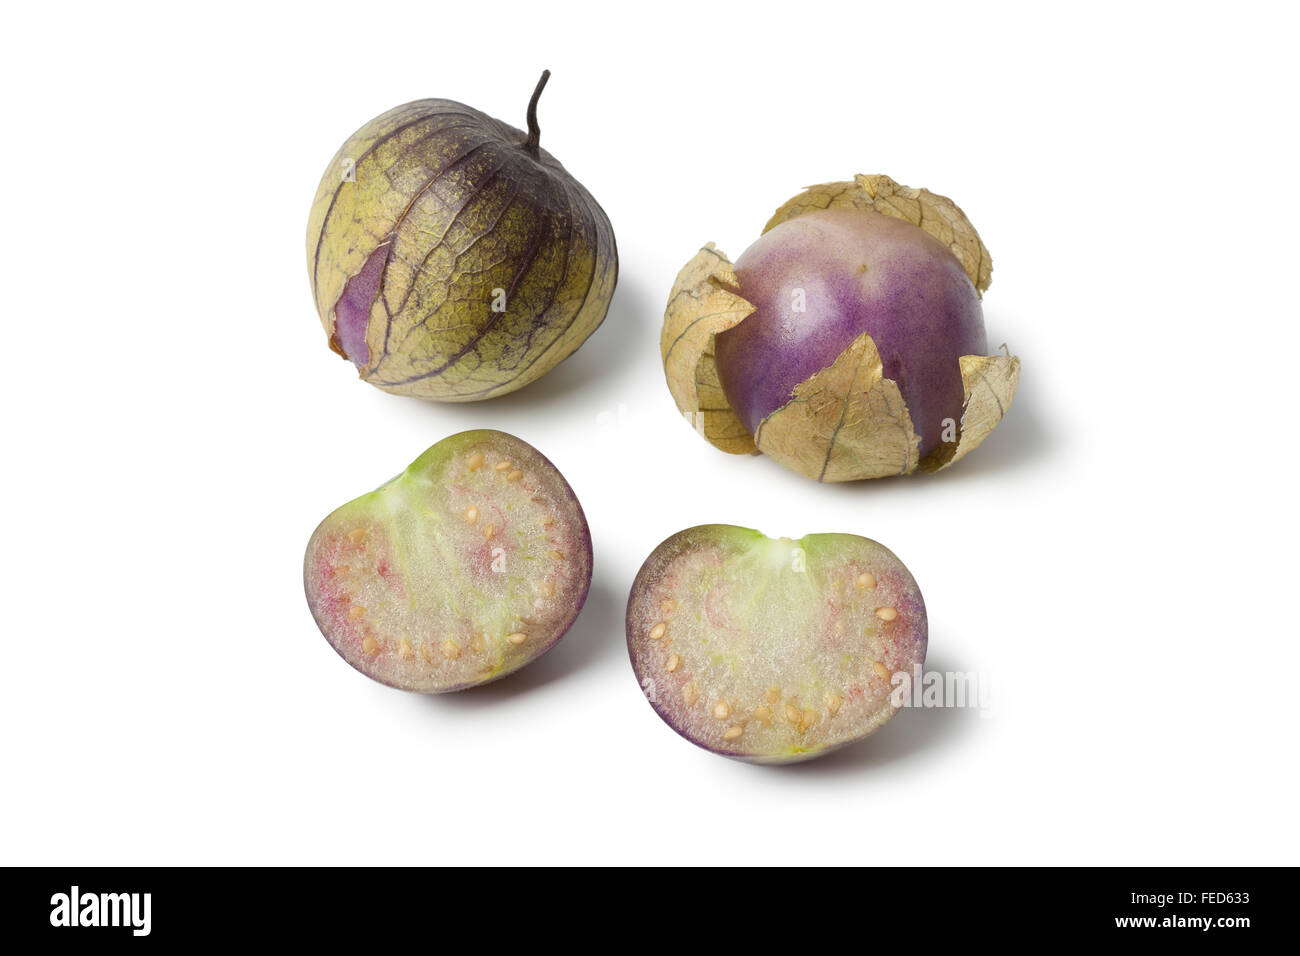 Fresh whole and half tomatillos in their husk on white background Stock Photo